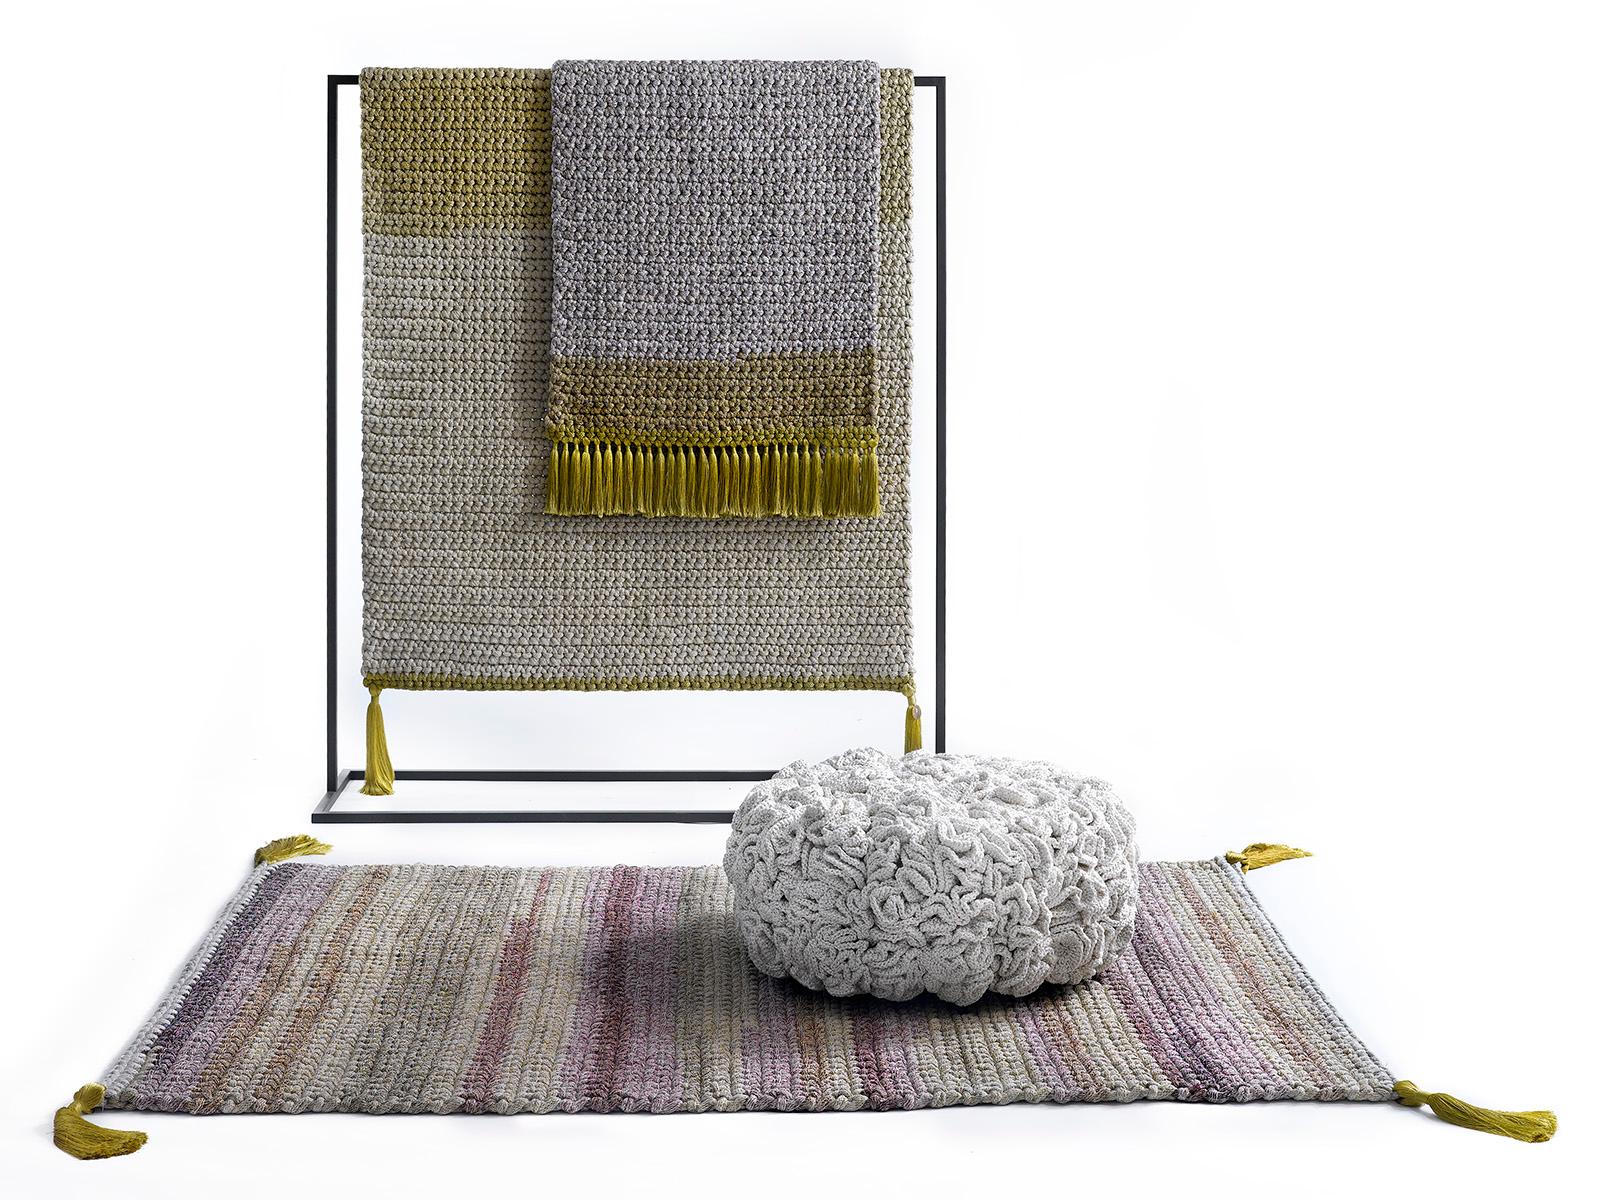 Israeli Two-Tone Handmade Crochet Cotton and Polyester Thick Luxurious Textile Rug